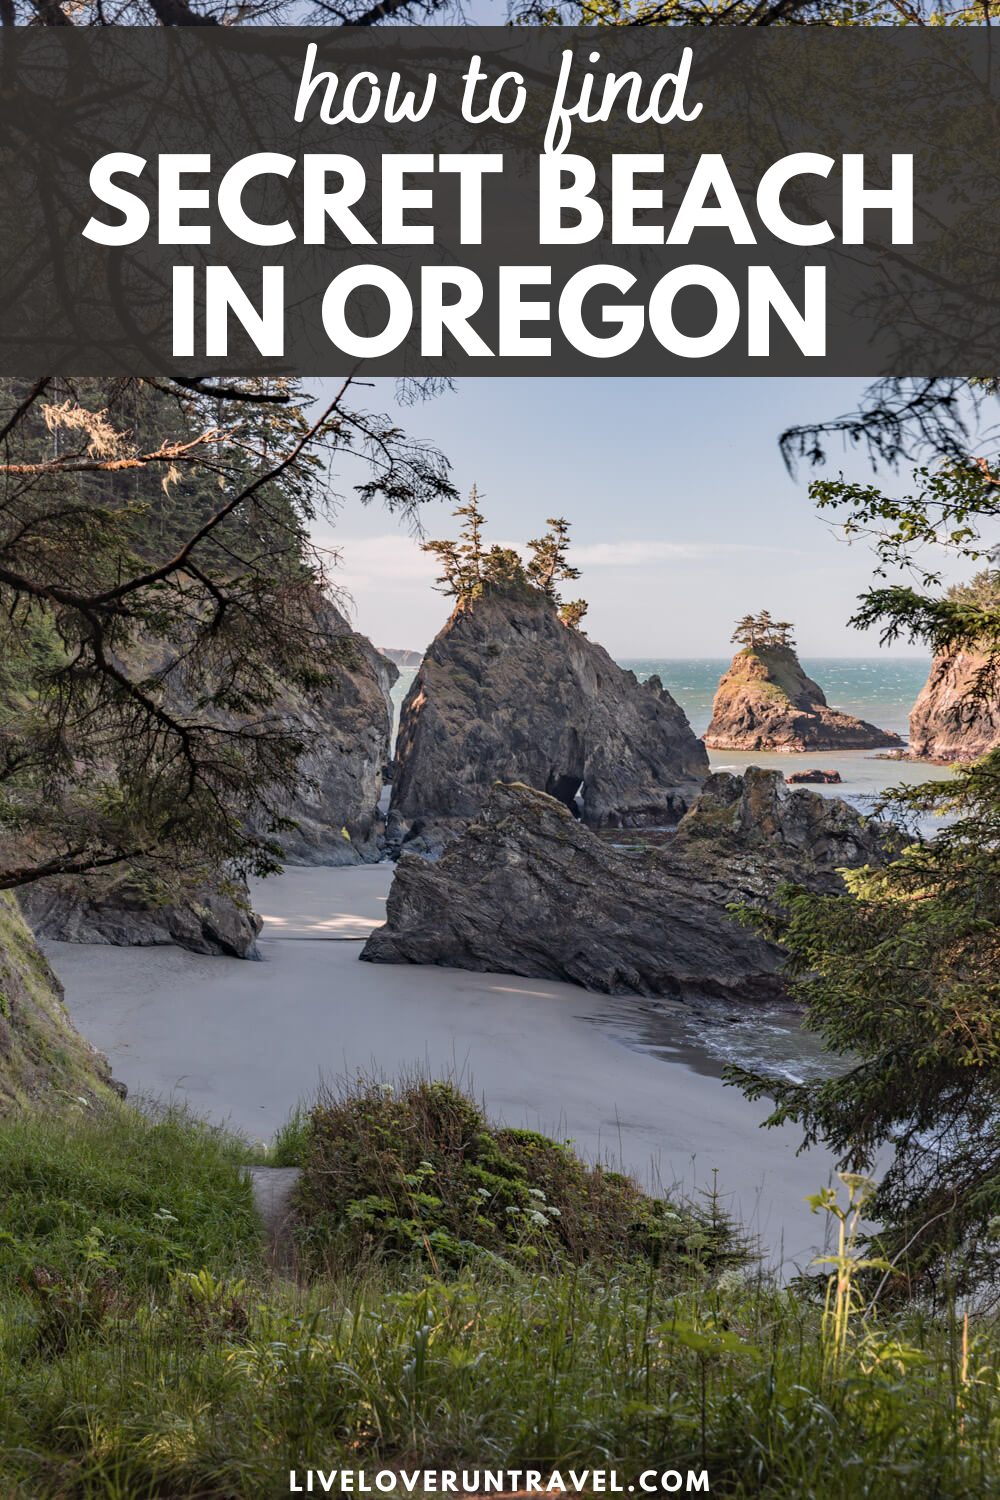 how to find secret beach oregon pin with images of secret beach from overlook